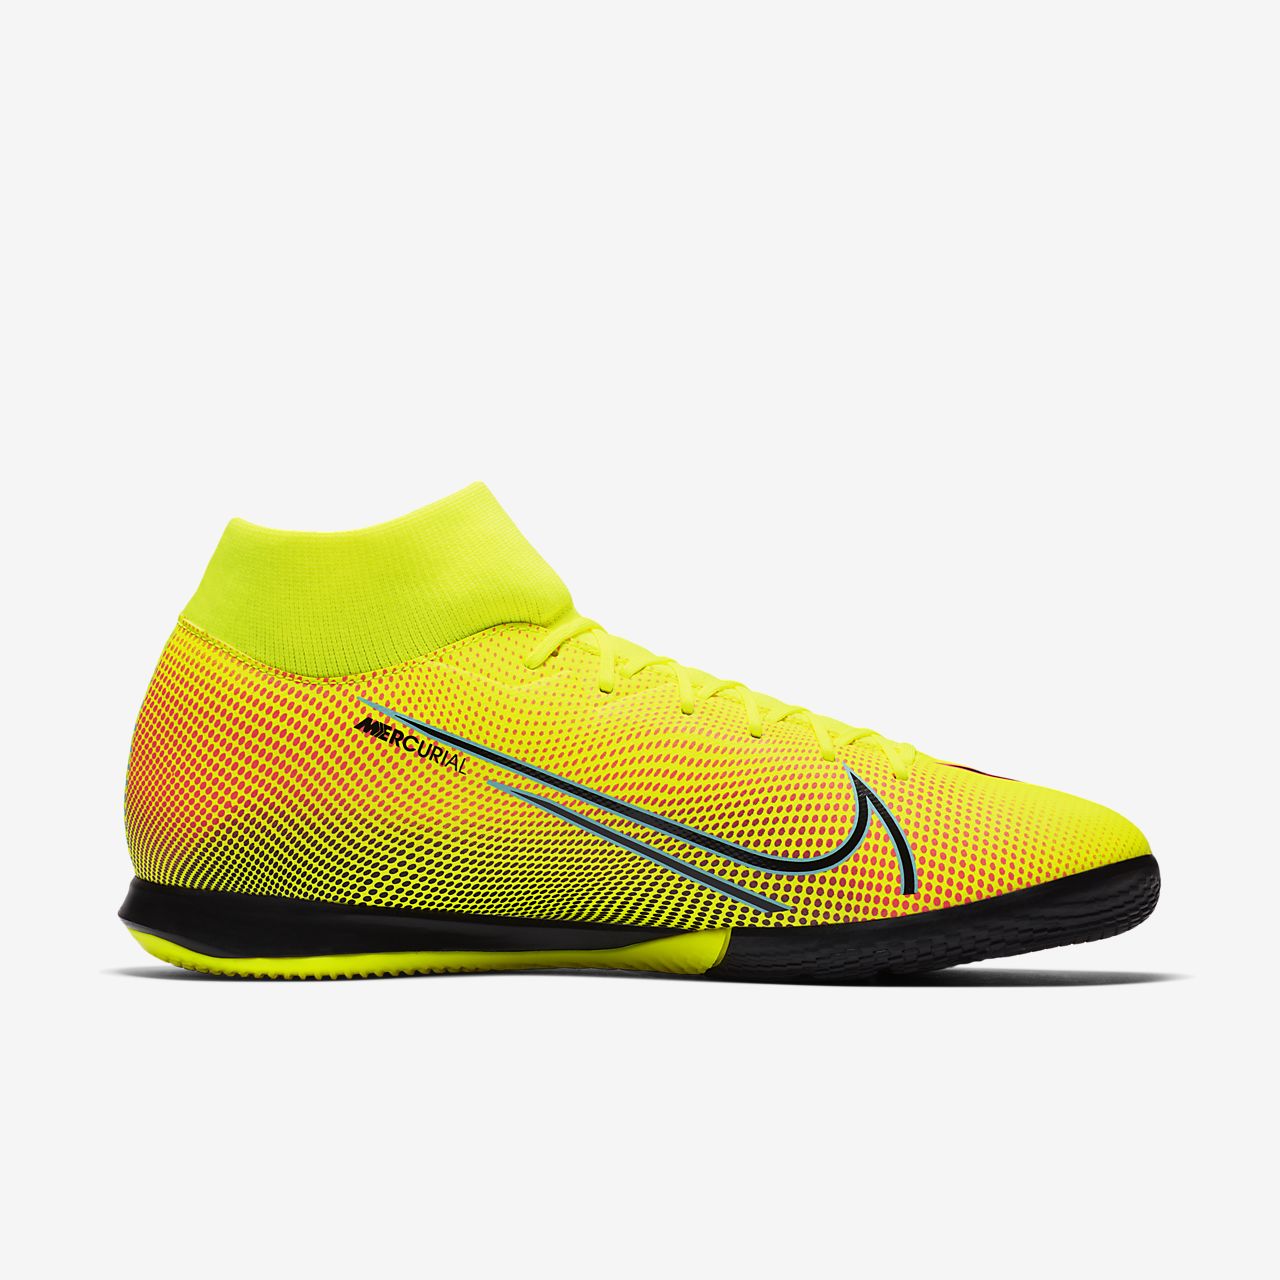 Nike Mercurial Superfly 7 Academy Turf Soccer Cleats.